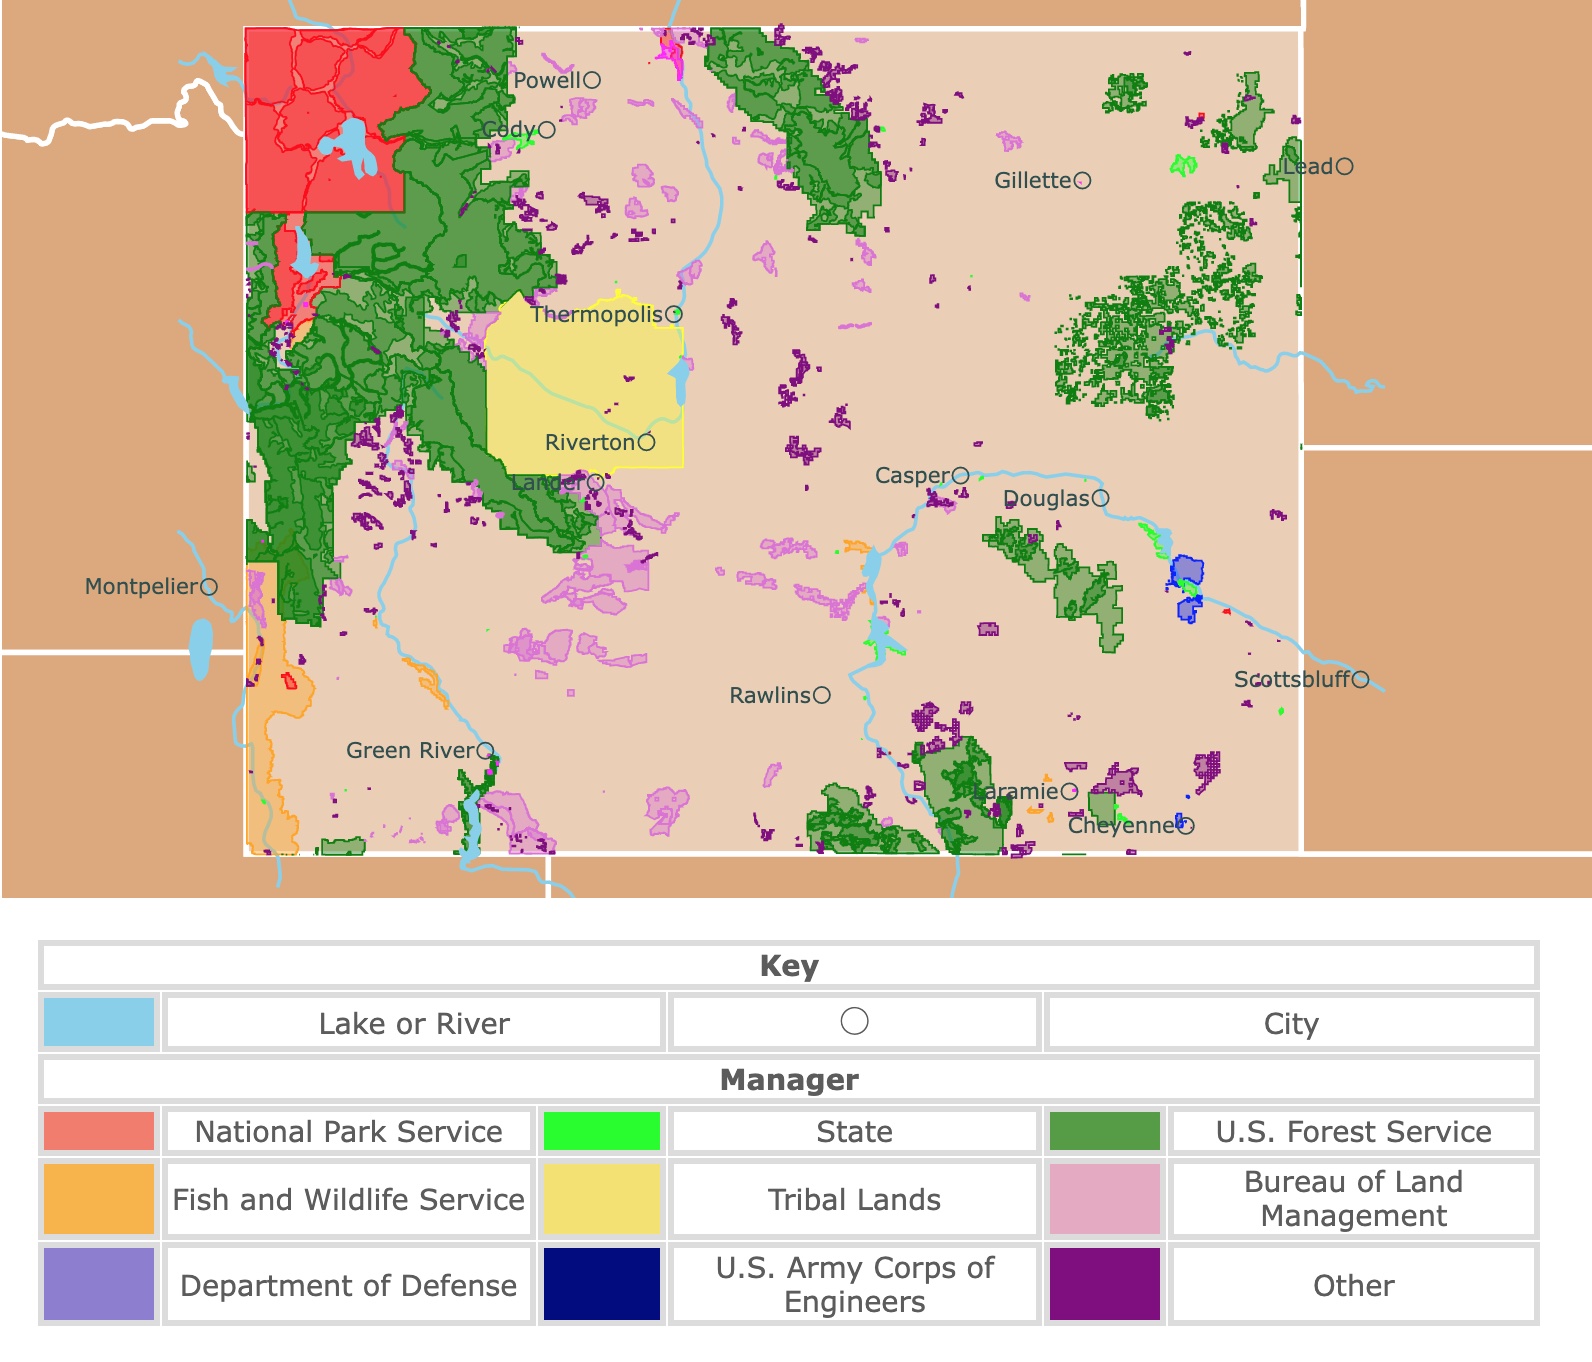 Map of Wyoming's state parks, national parks, forests, and public lands areas